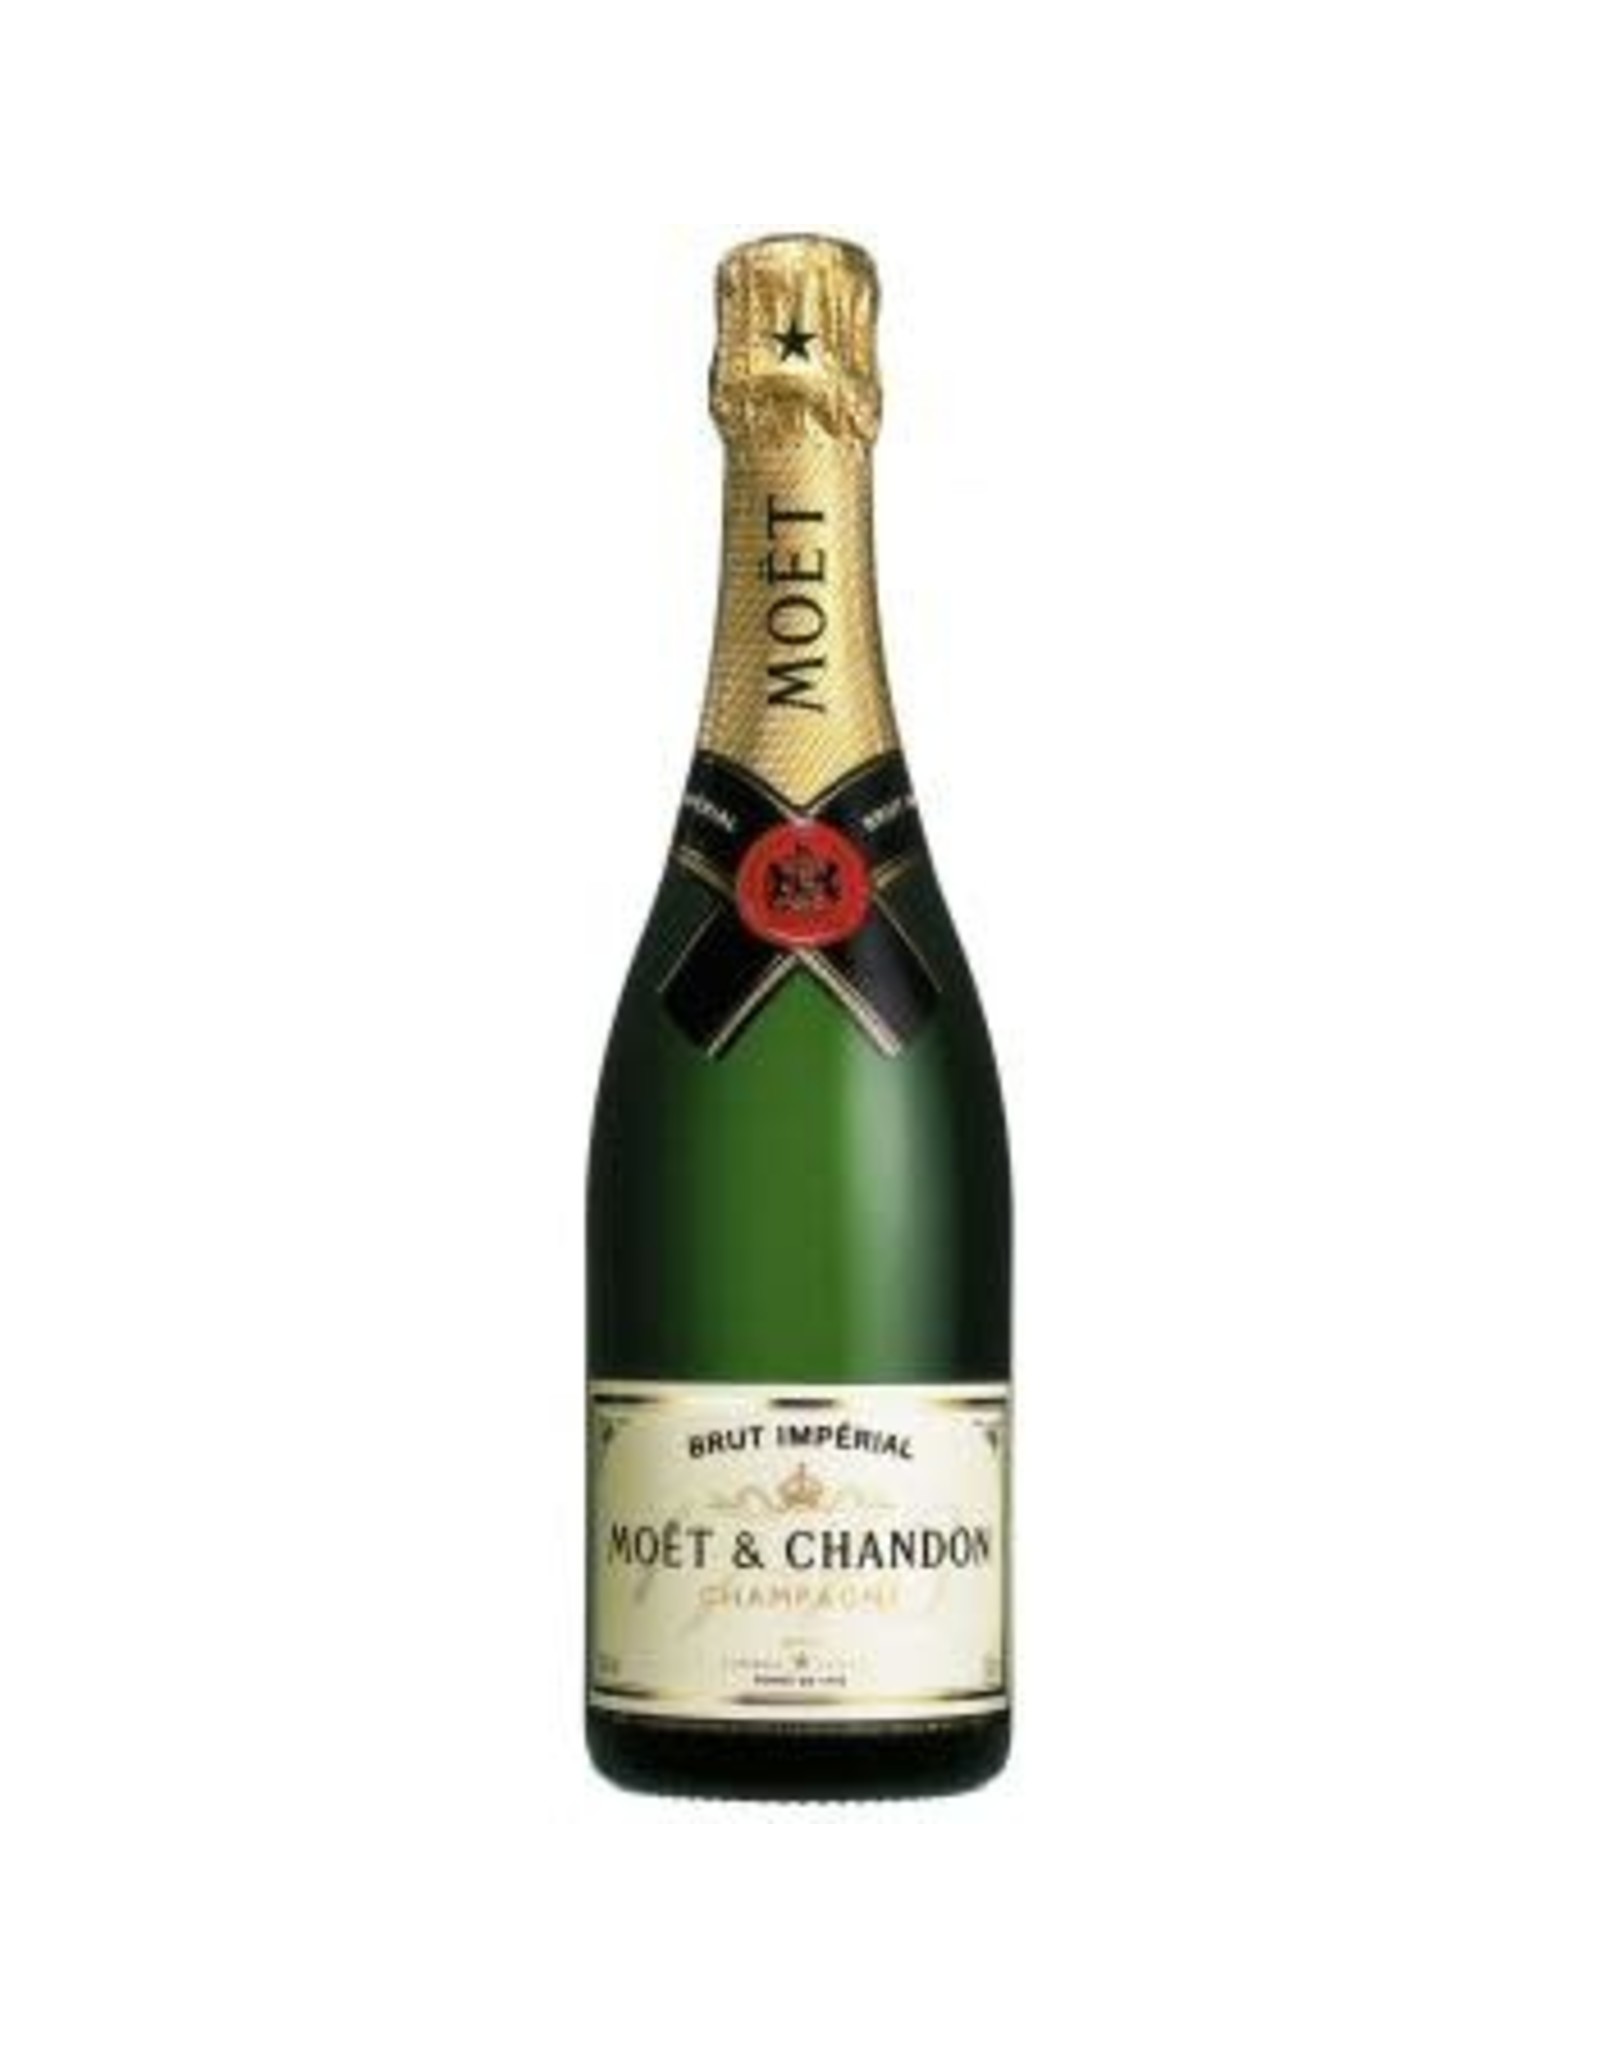 MOET & CHANDON IMPERIAL CHAMPAGNE 750ml